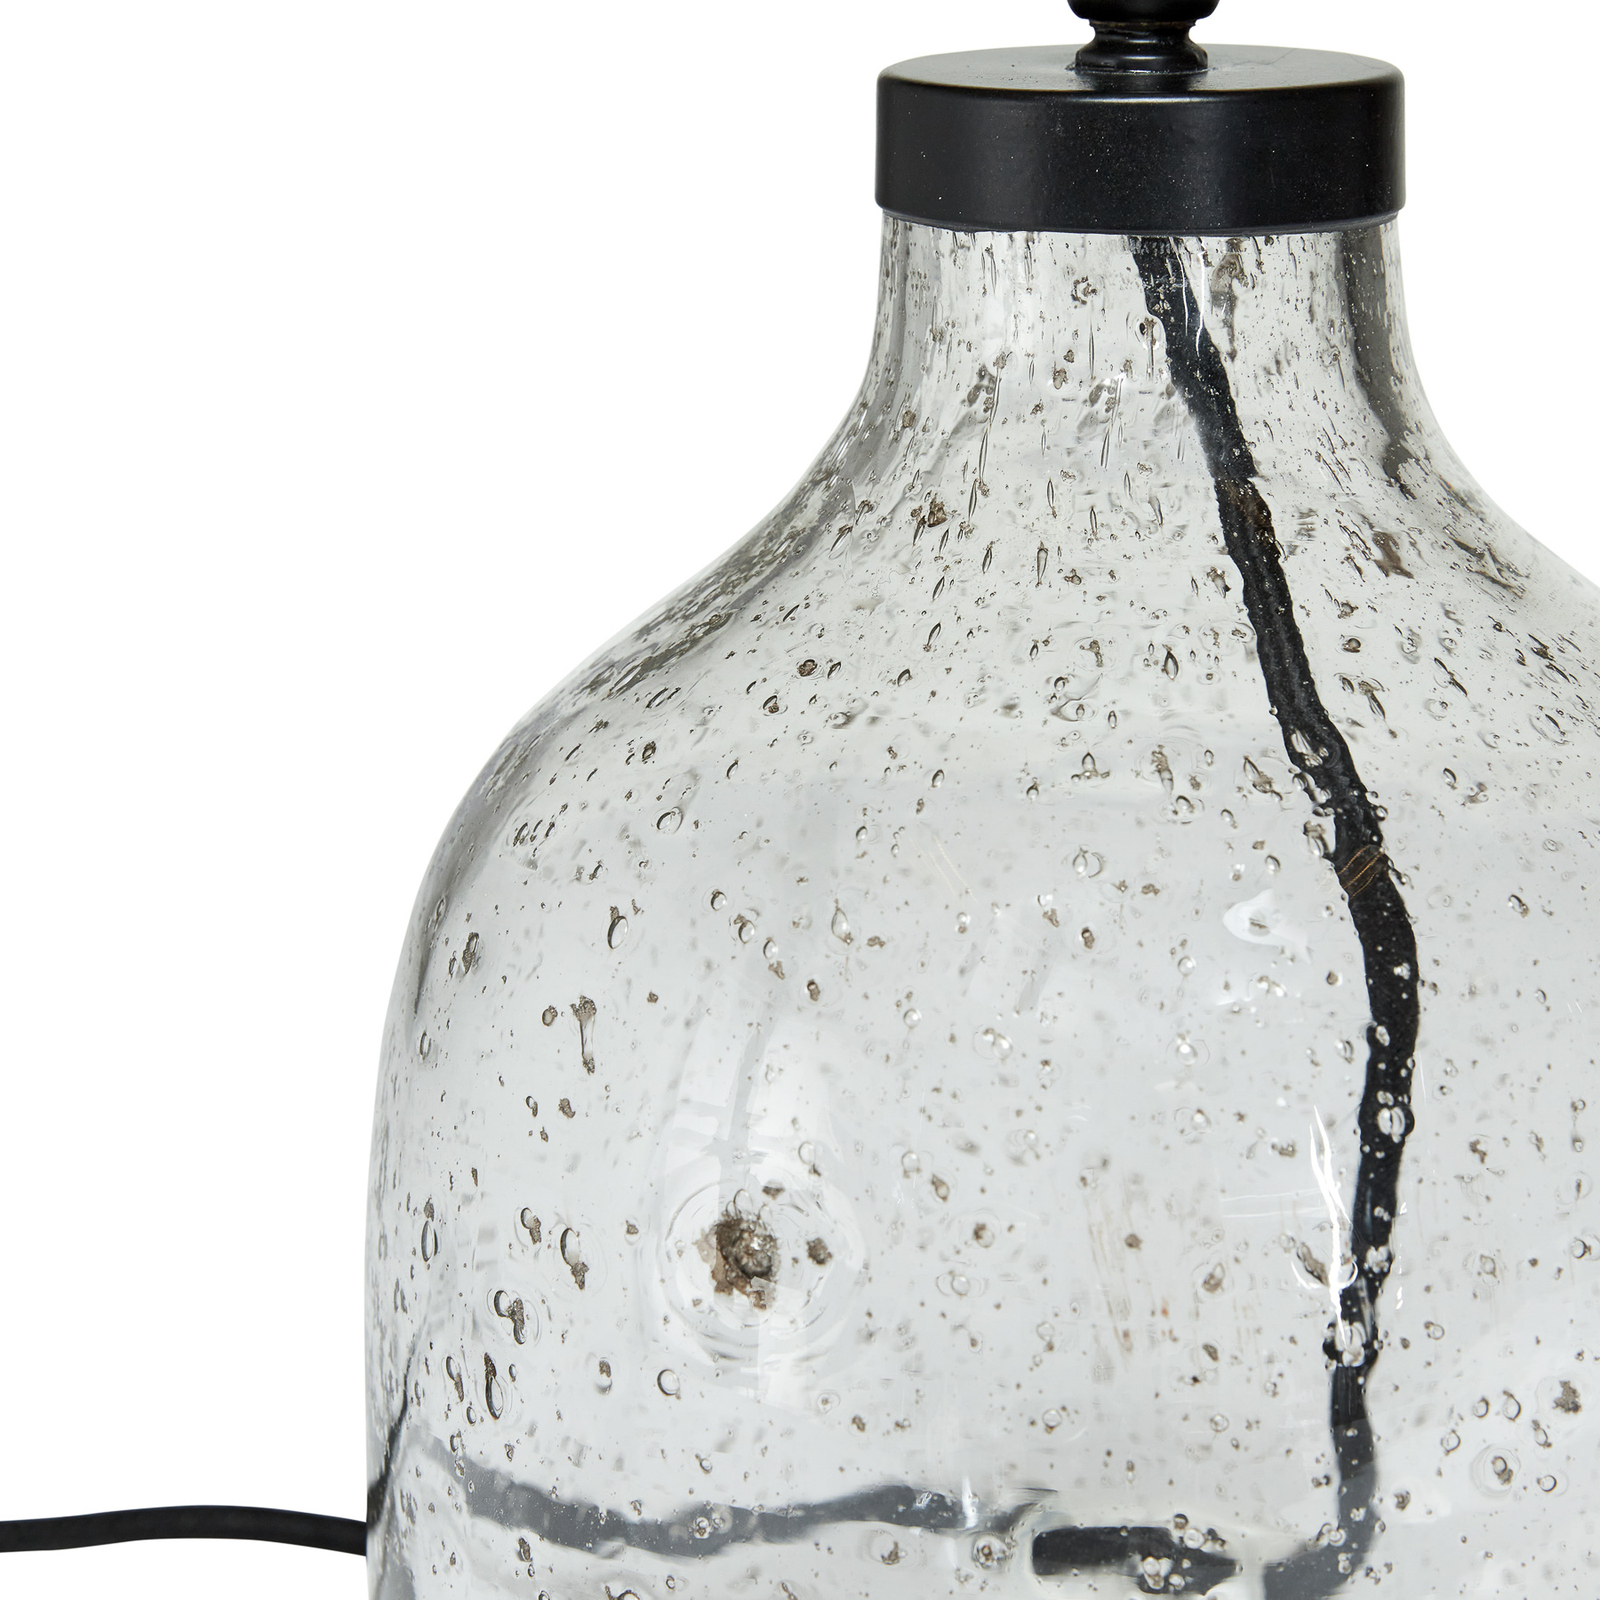 PR Home Groove table lamp clear glass white fabric